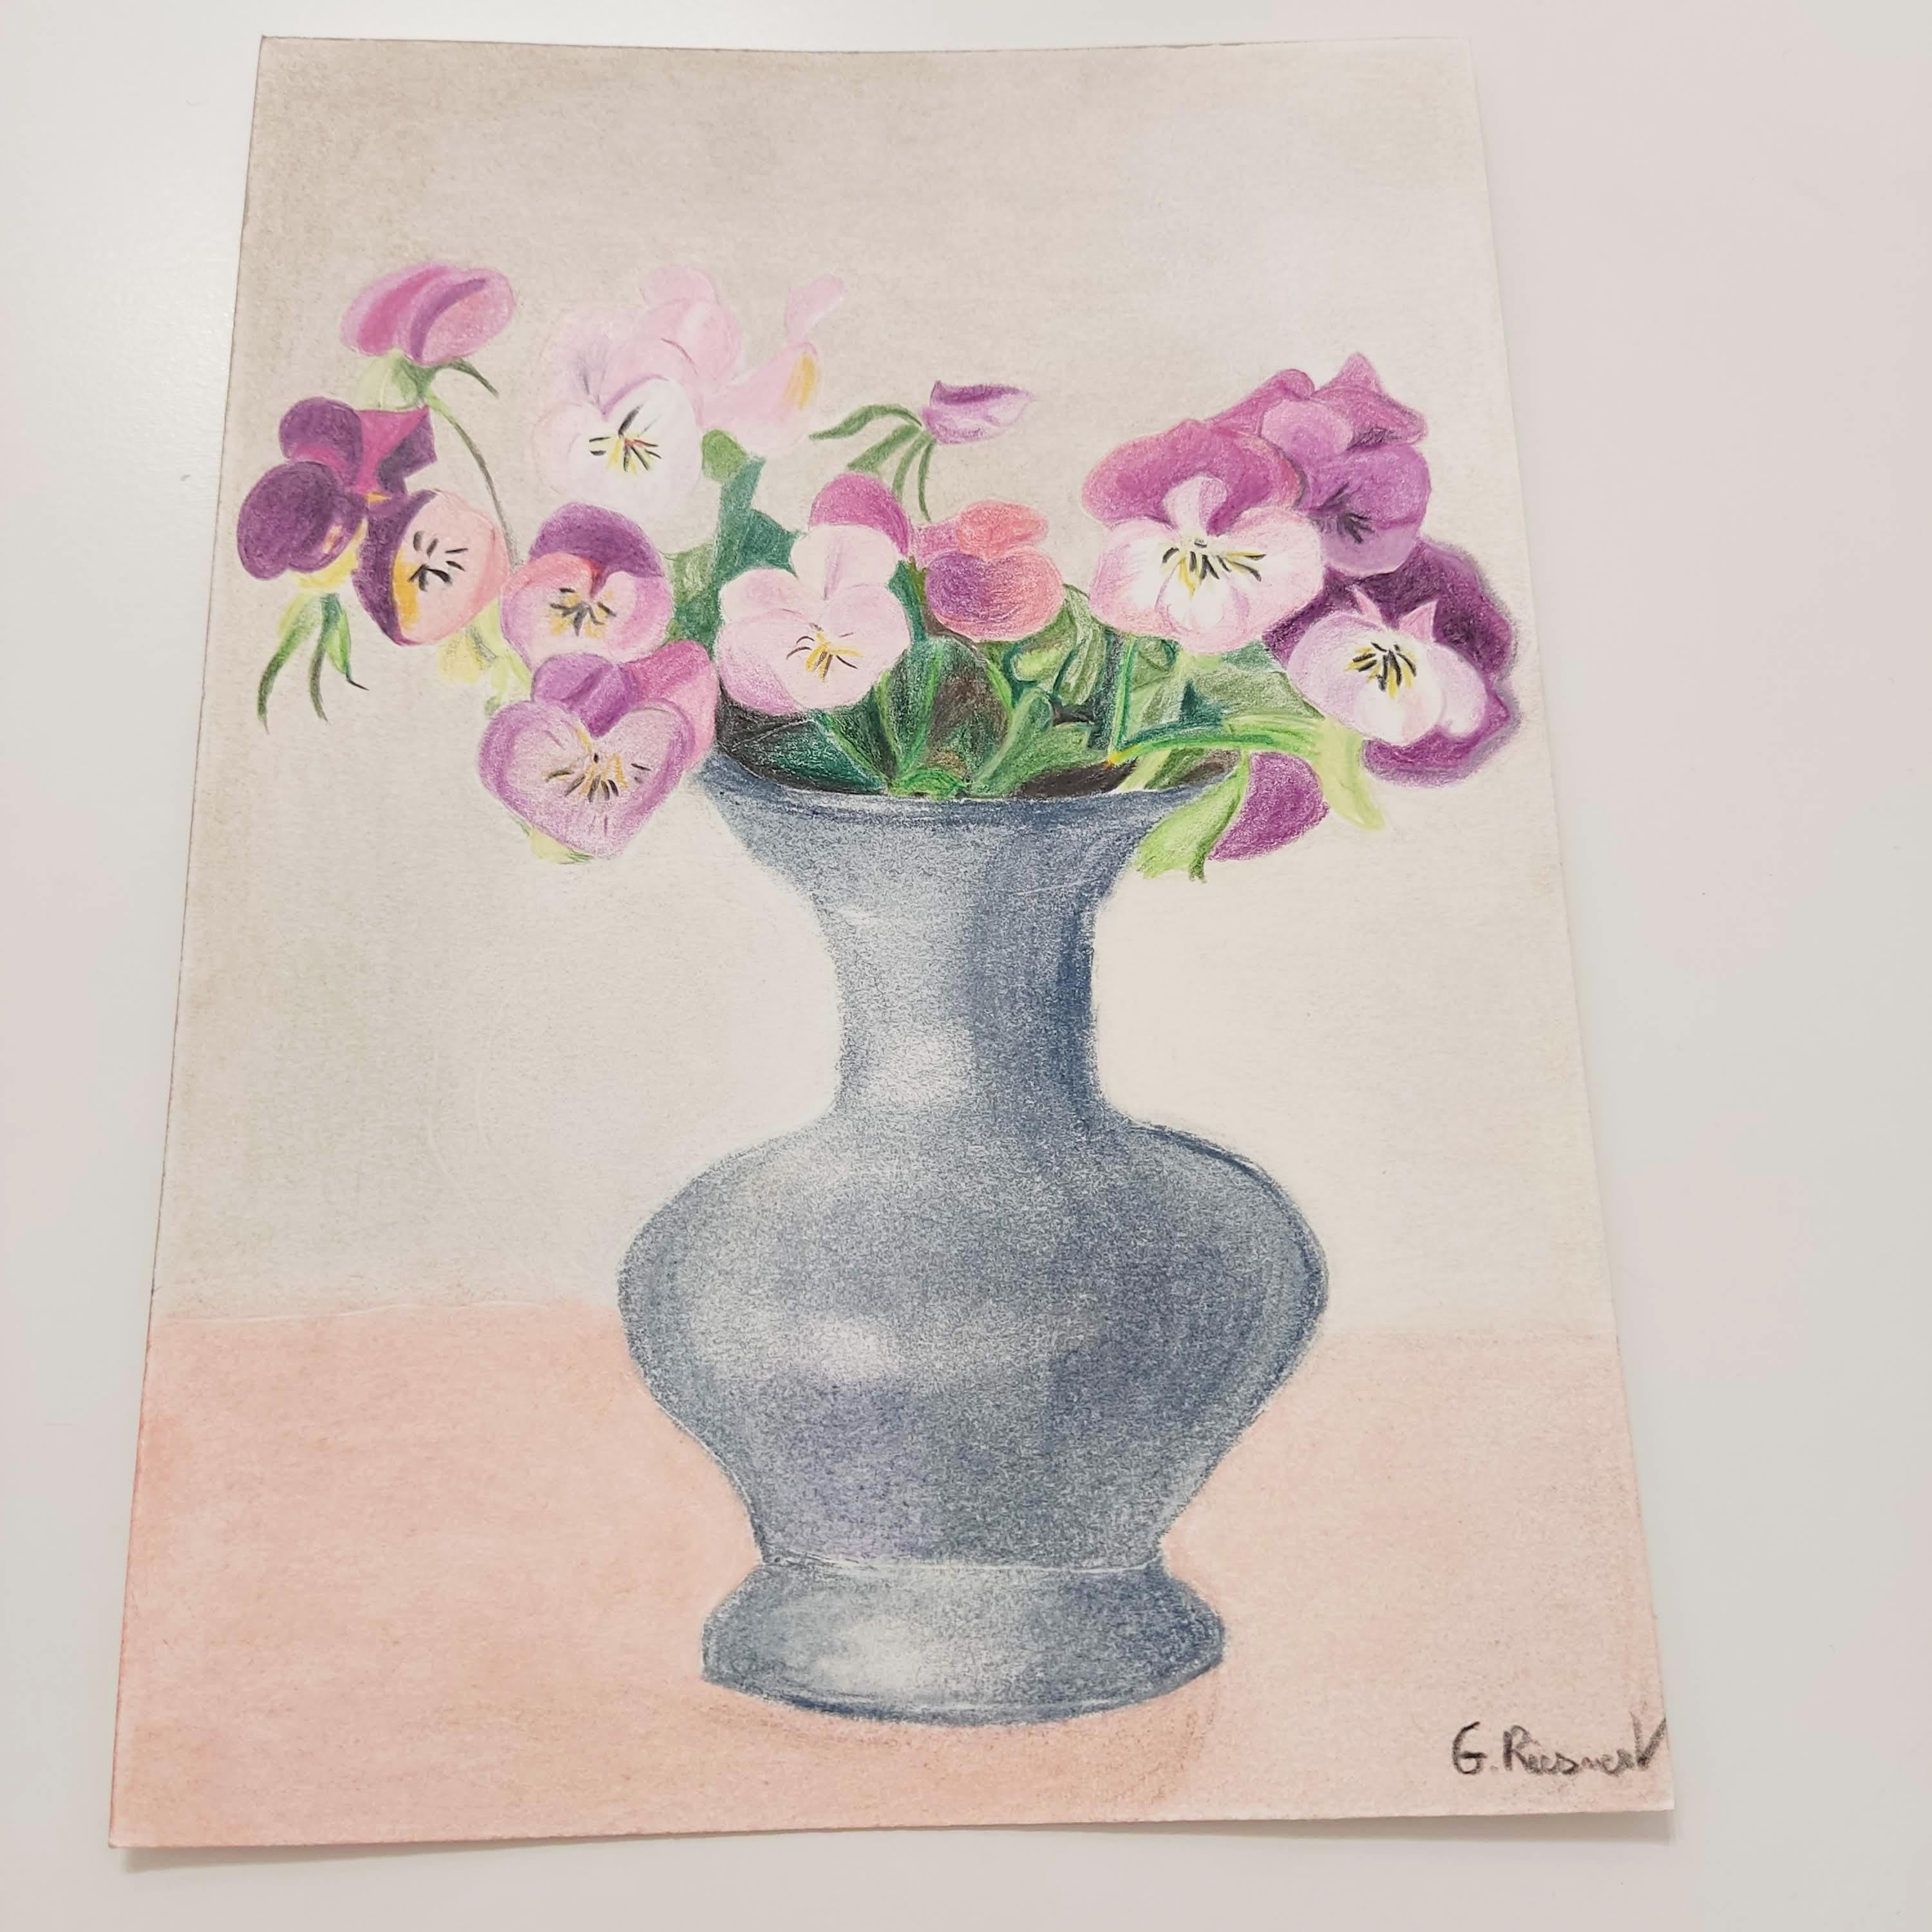 Pansy with Vase - Original Drawing, Pastel, flowers, Interior - Contemporary Art by Gabriel Riesnert